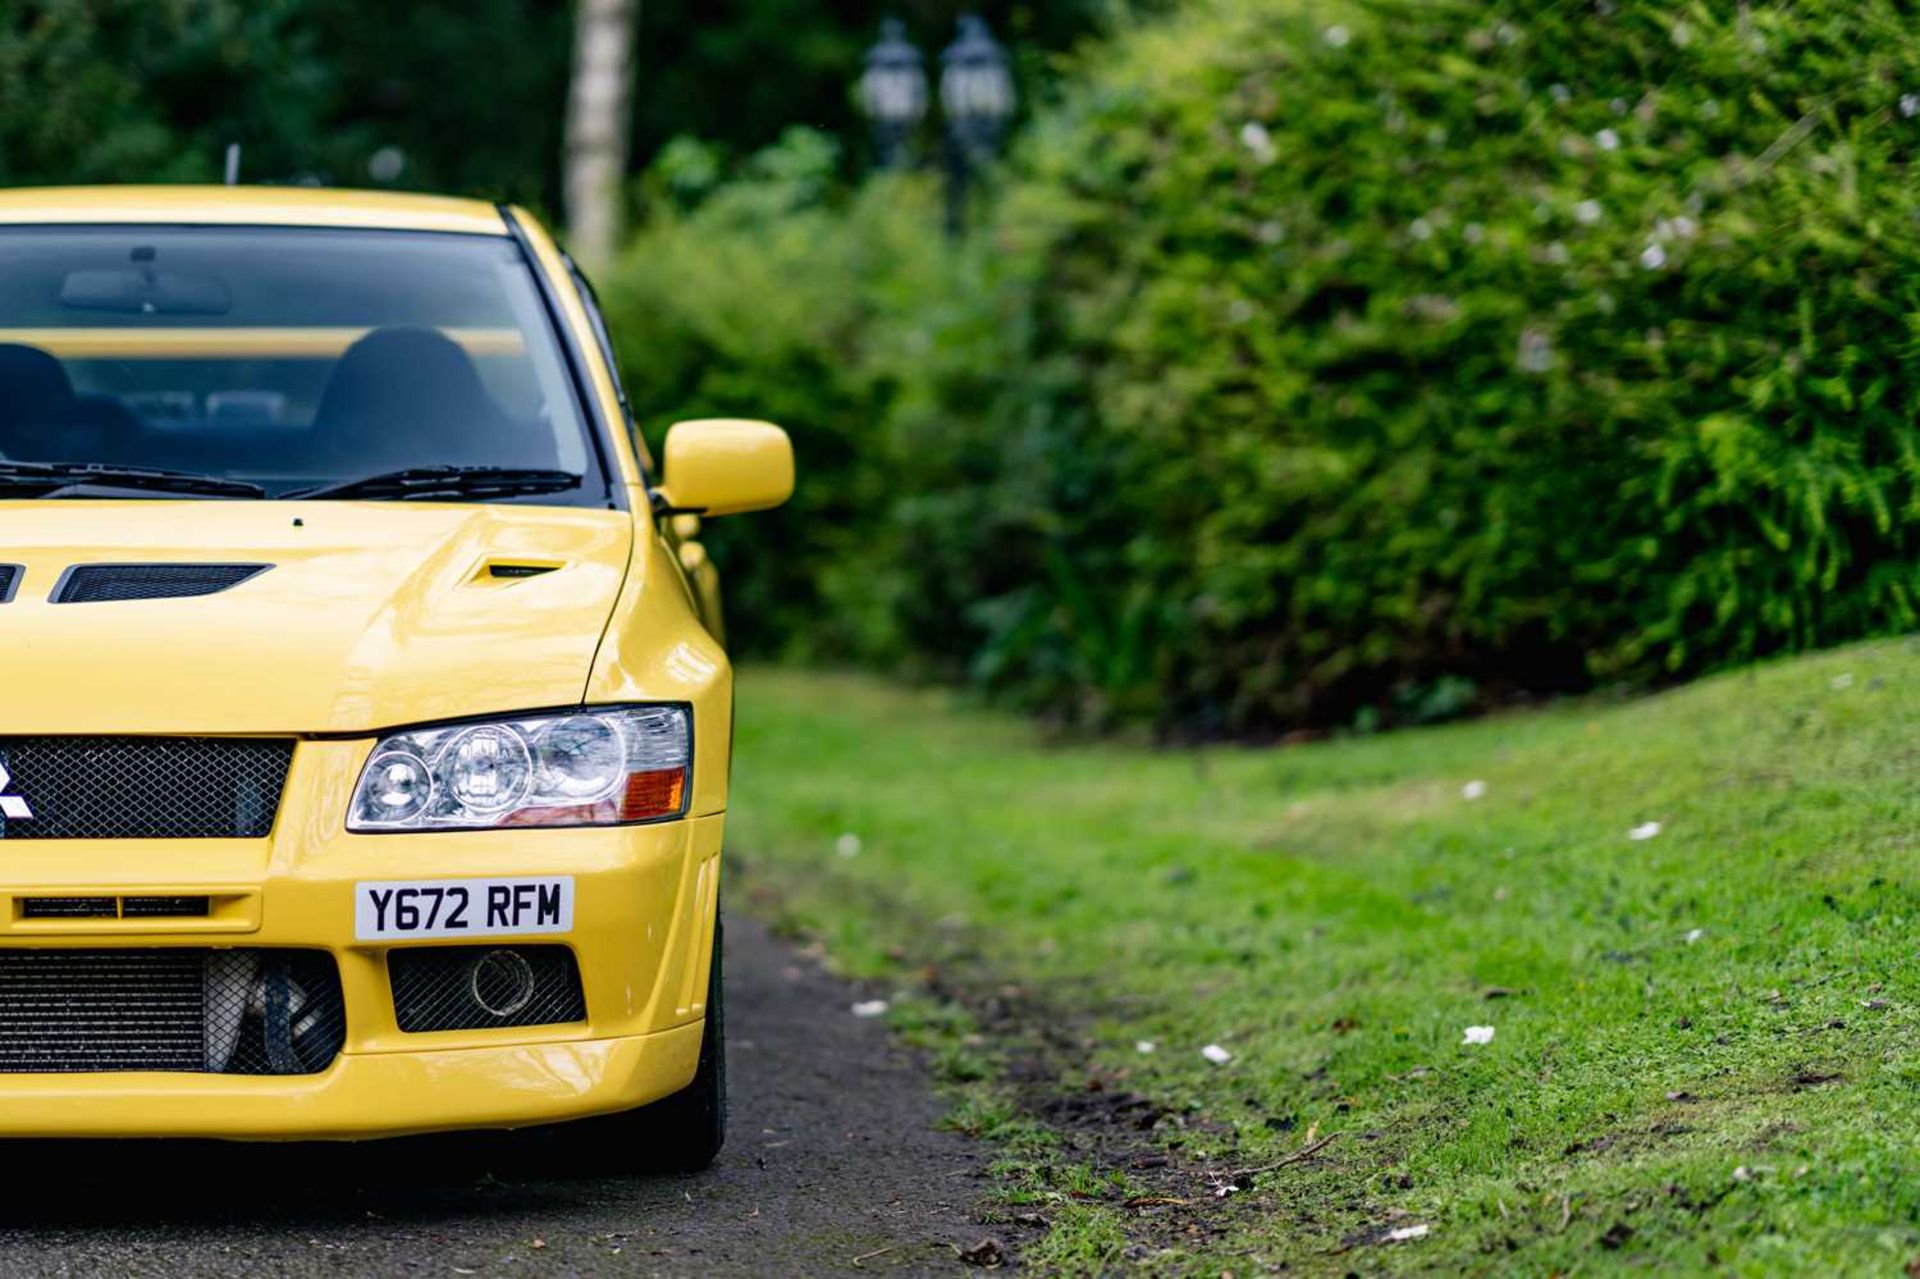 2001 Mitsubishi Lancer Evolution VII Subtly upgraded and previous long-term (seventeen year) ownersh - Image 4 of 64